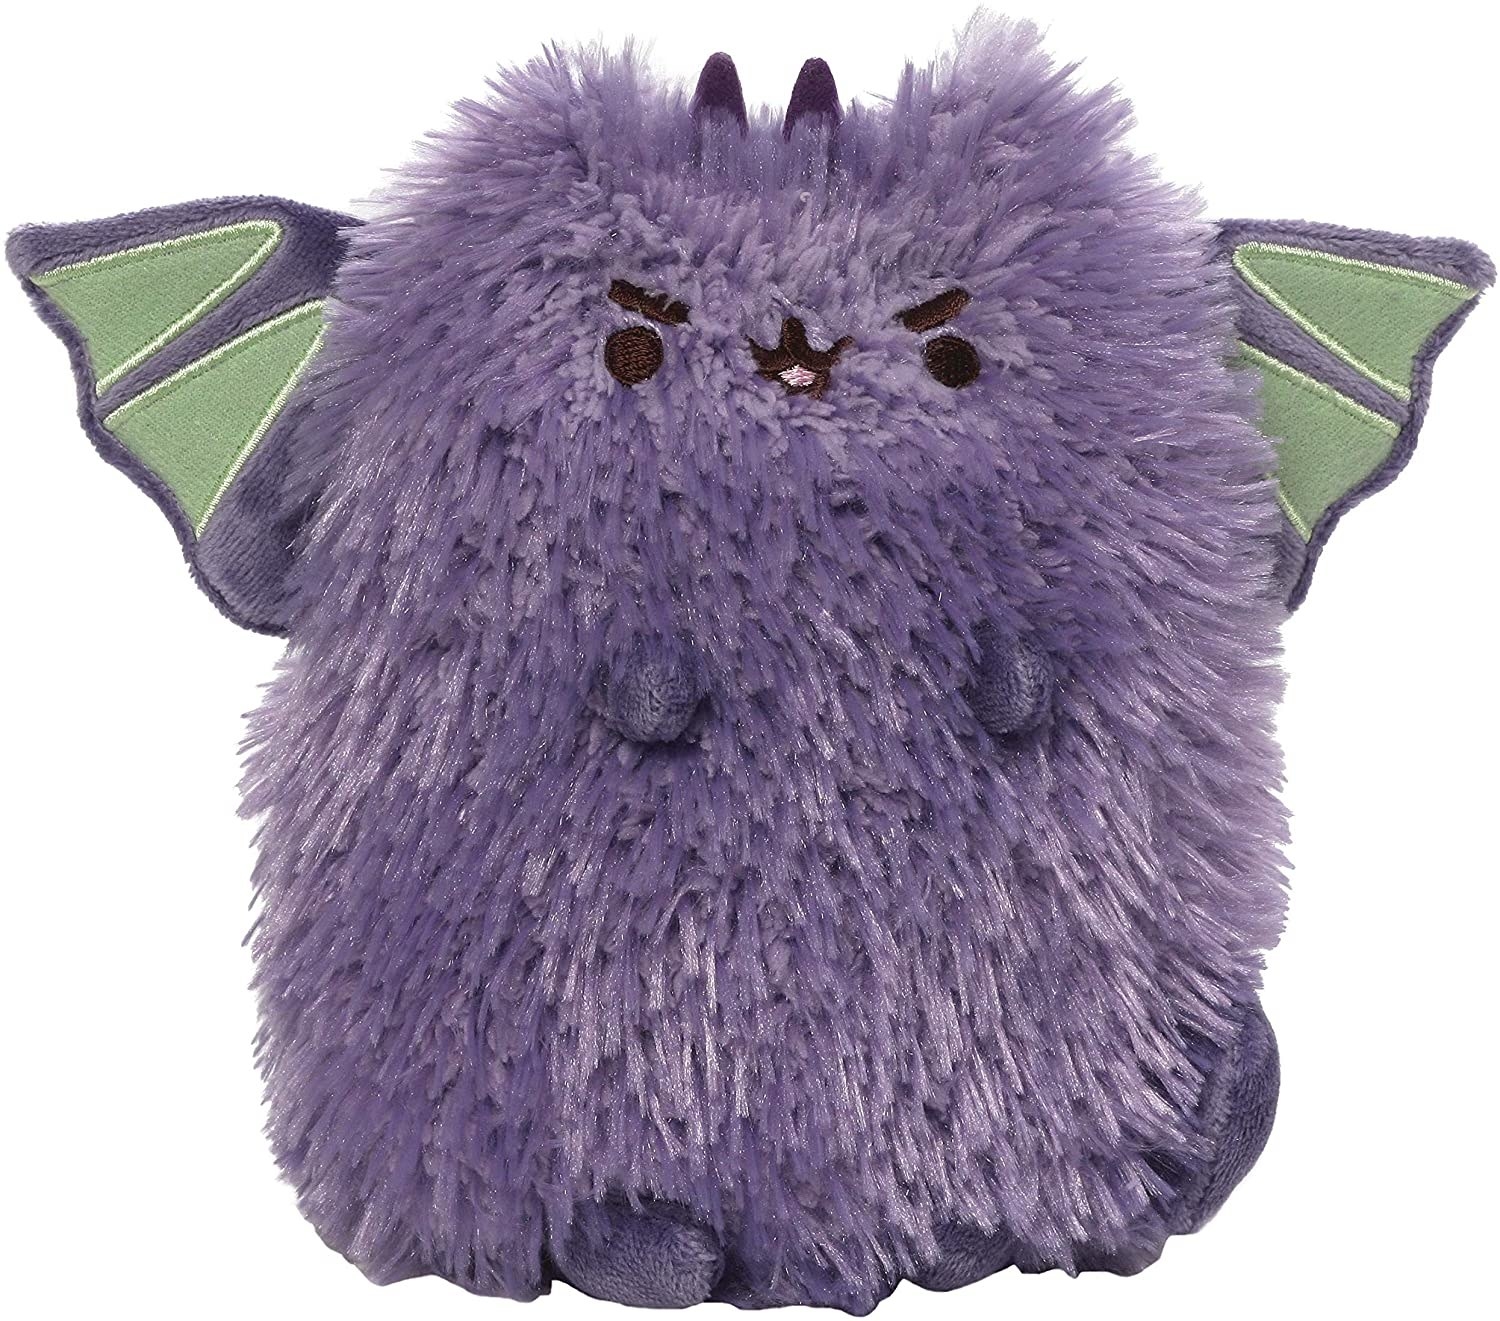 the purple and green plush of a kitten dressed like a dragon